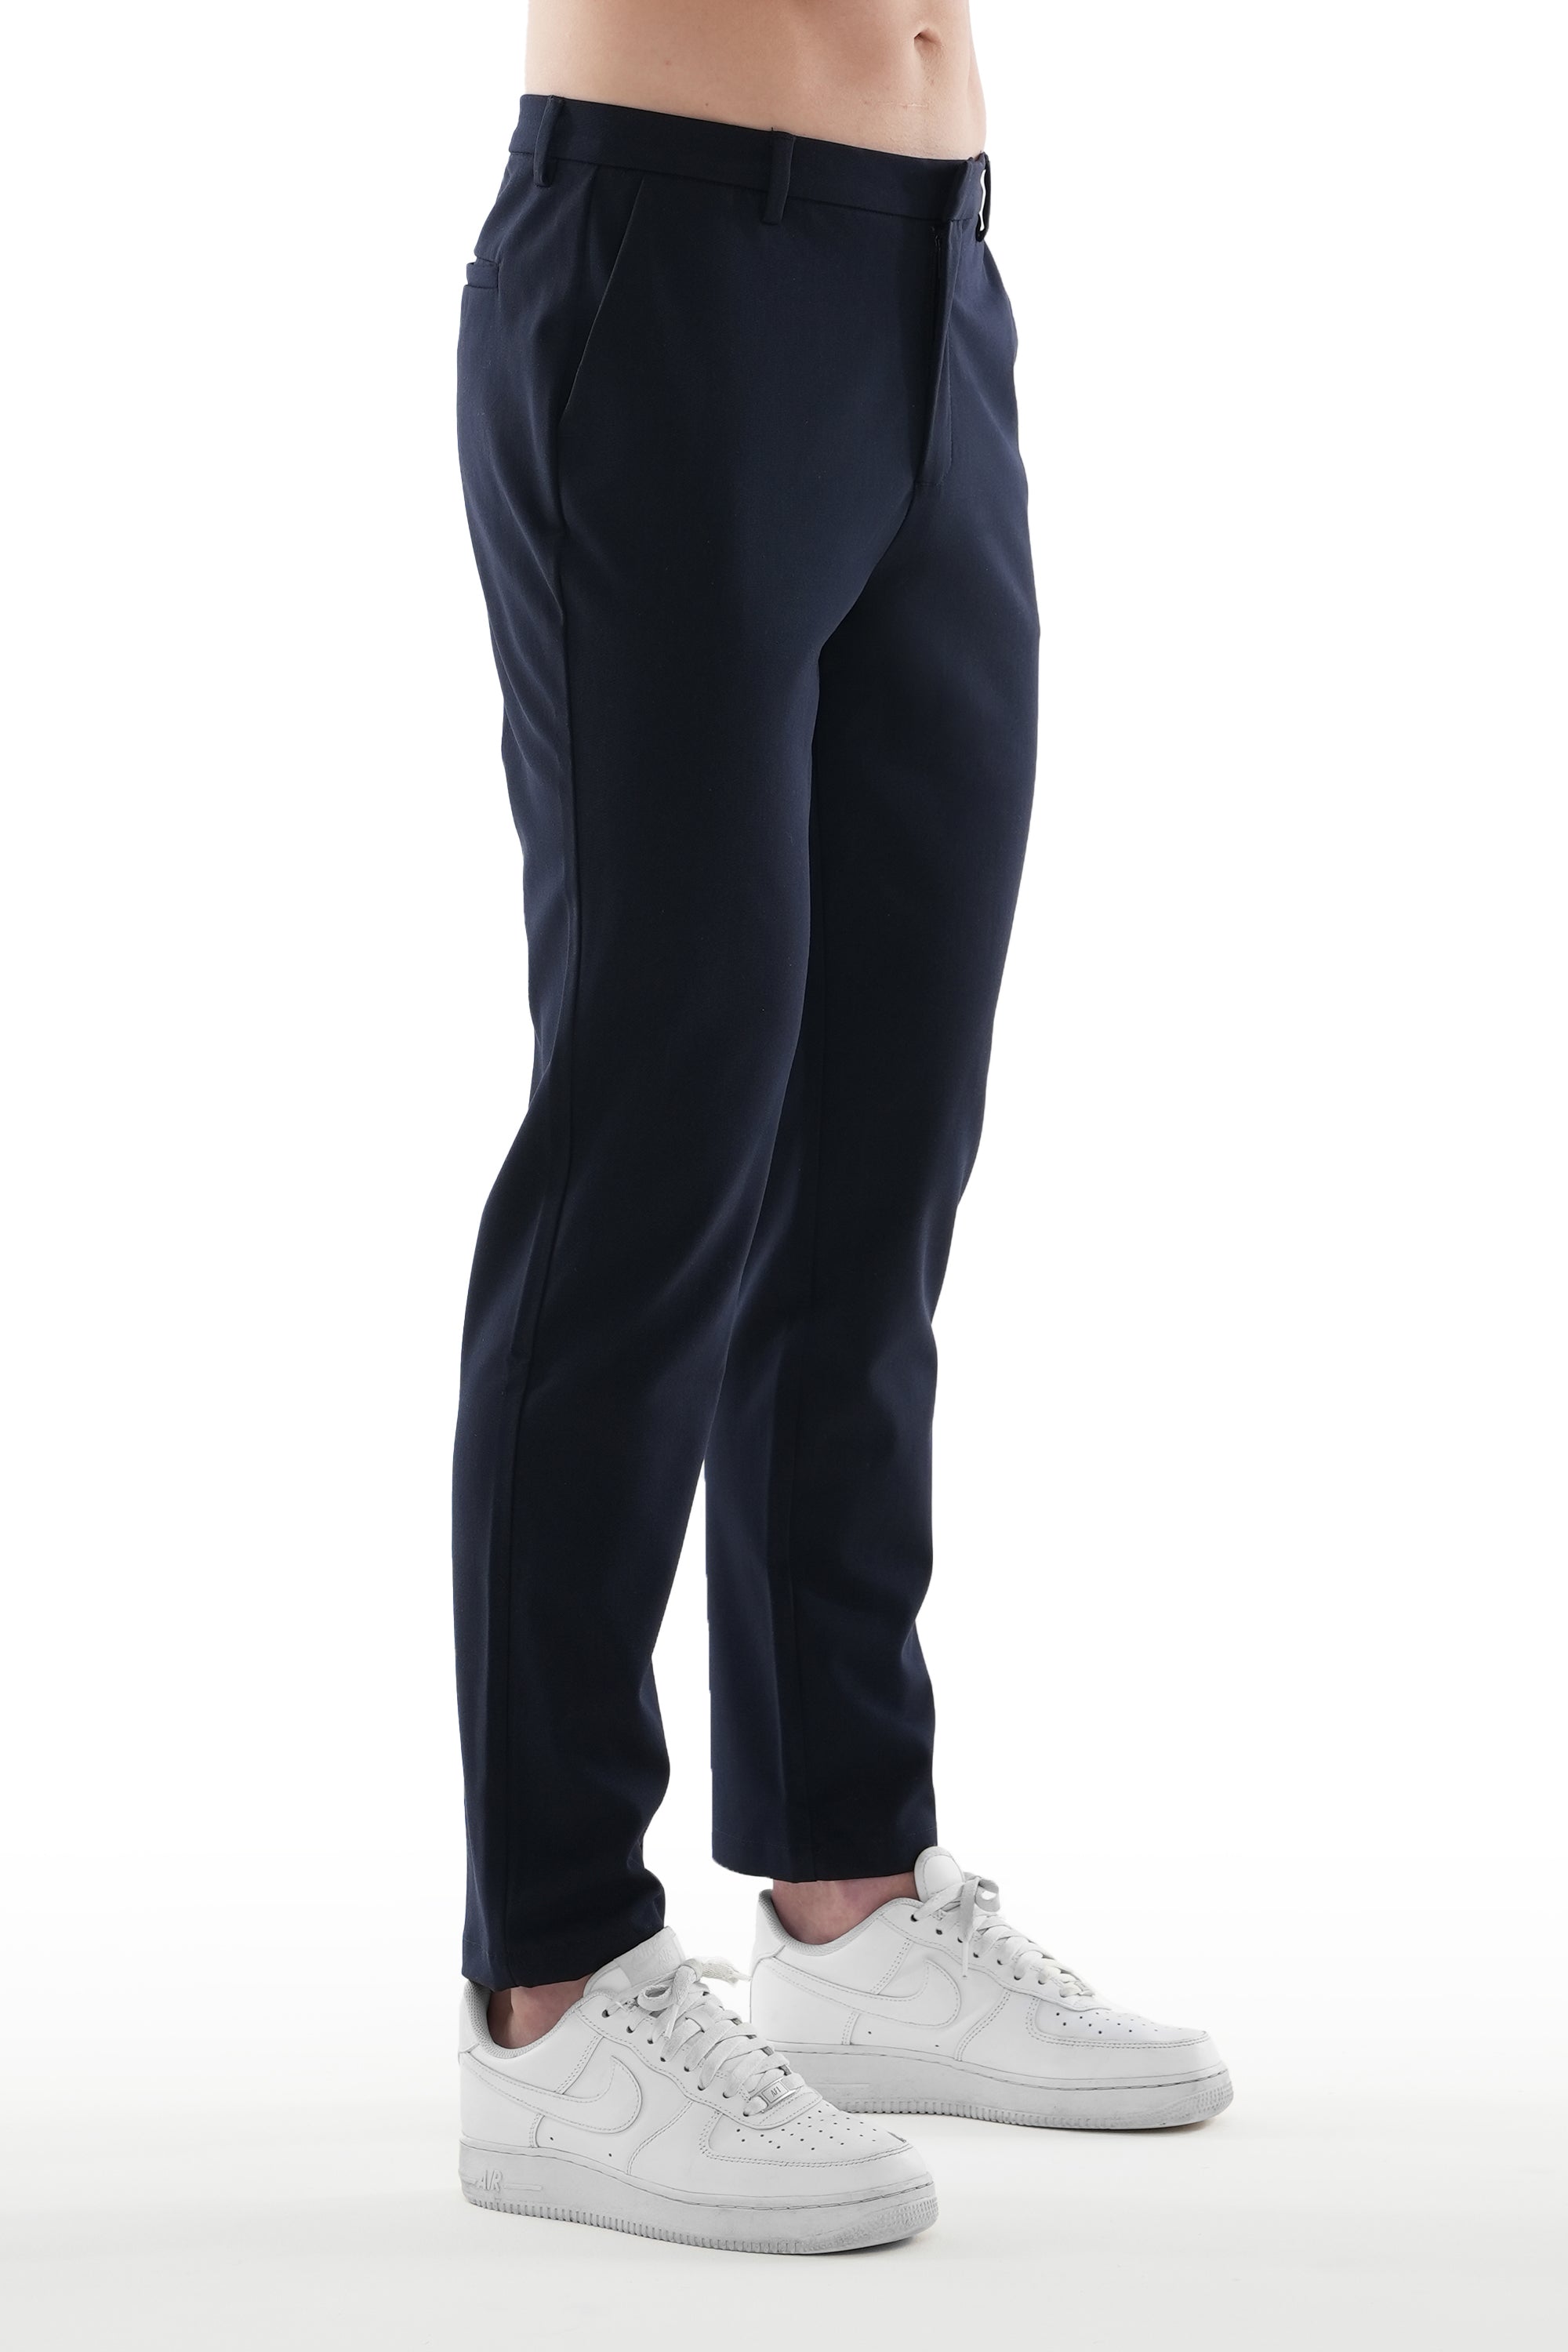 THE LUCIA TROUSERS - NAVY BLUE - ICON. AMSTERDAM